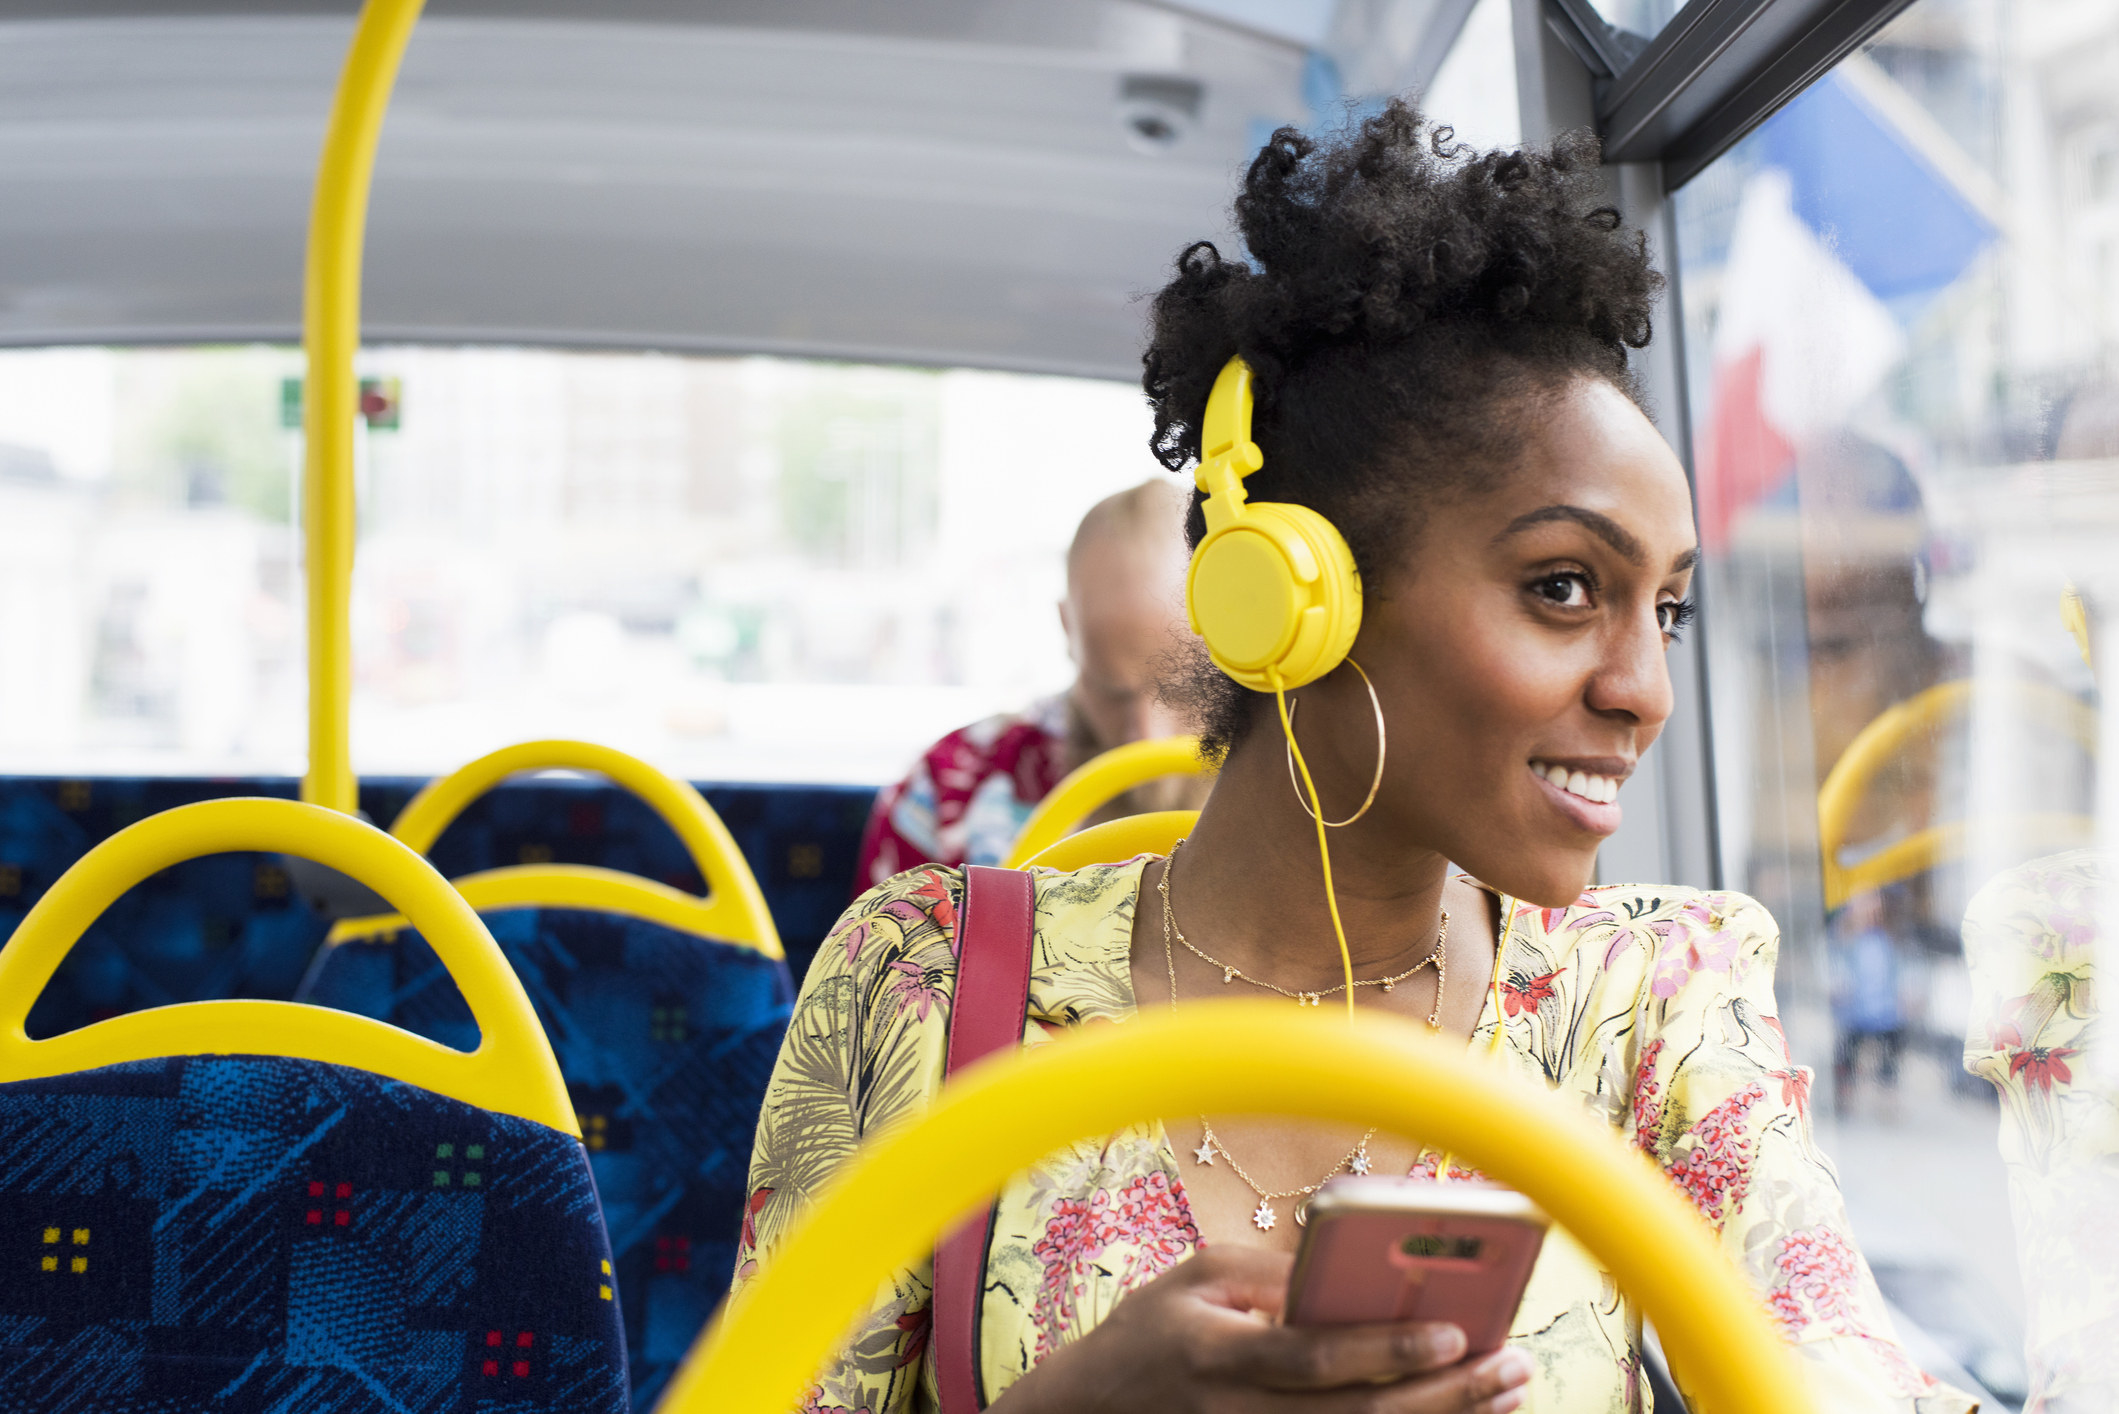 Woman listening to music on her phone through headphones while on the bus